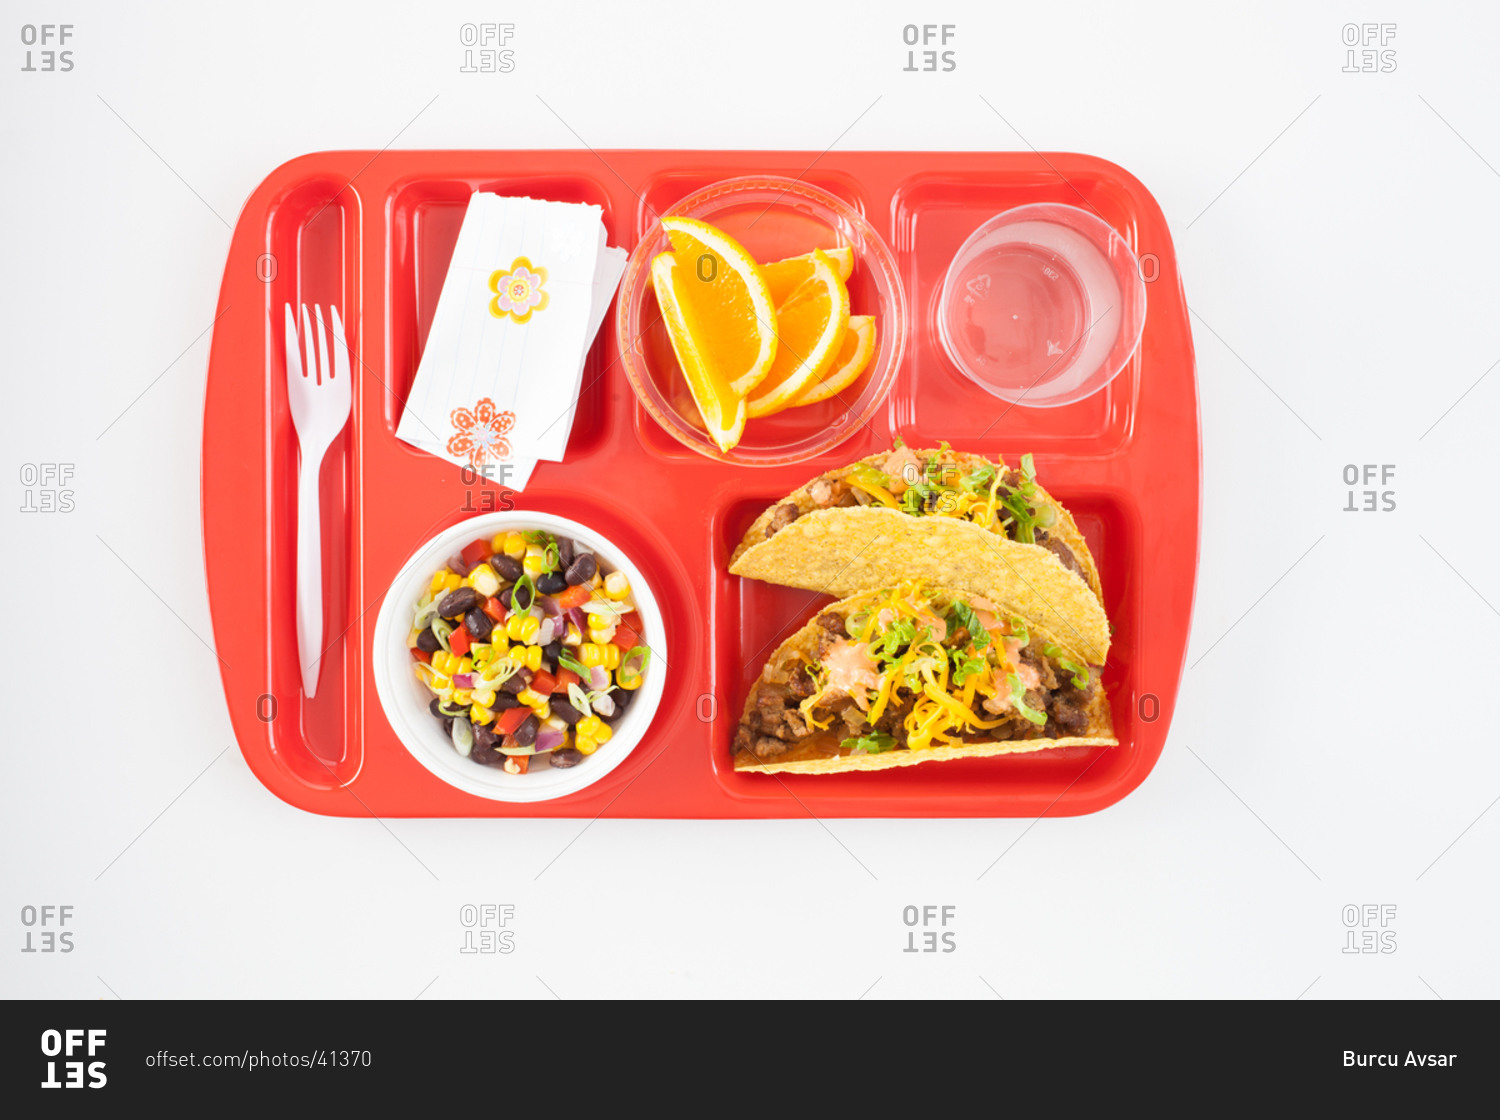 Hard Shell Tacos served on lunch tray